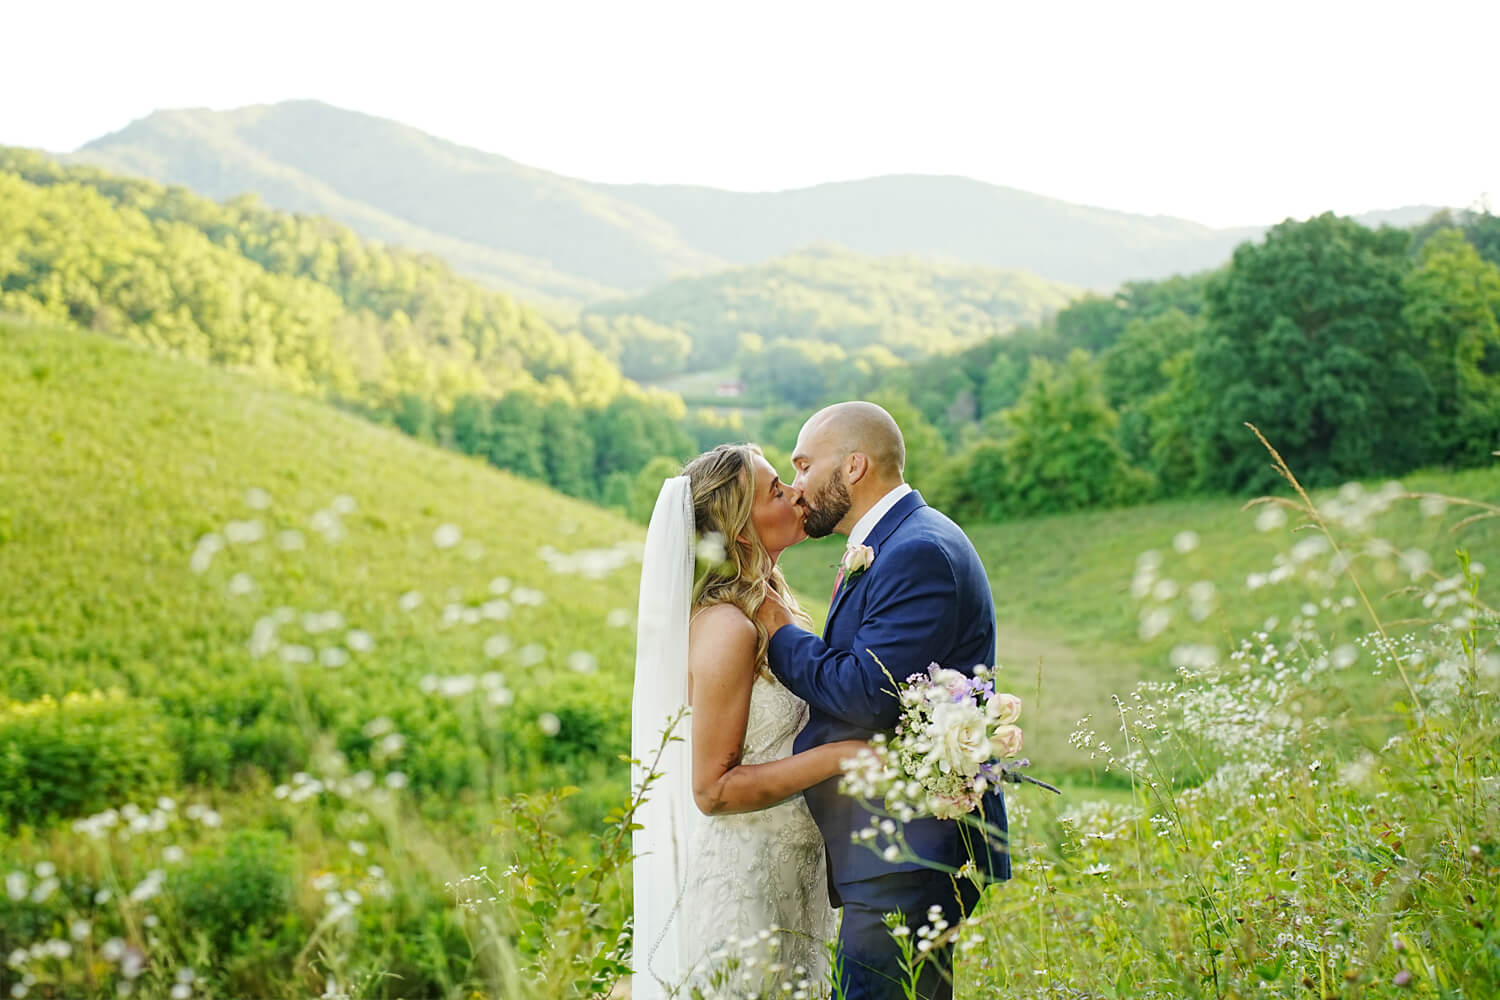 Weddign couple kissing in front of white daisies at a mountain view